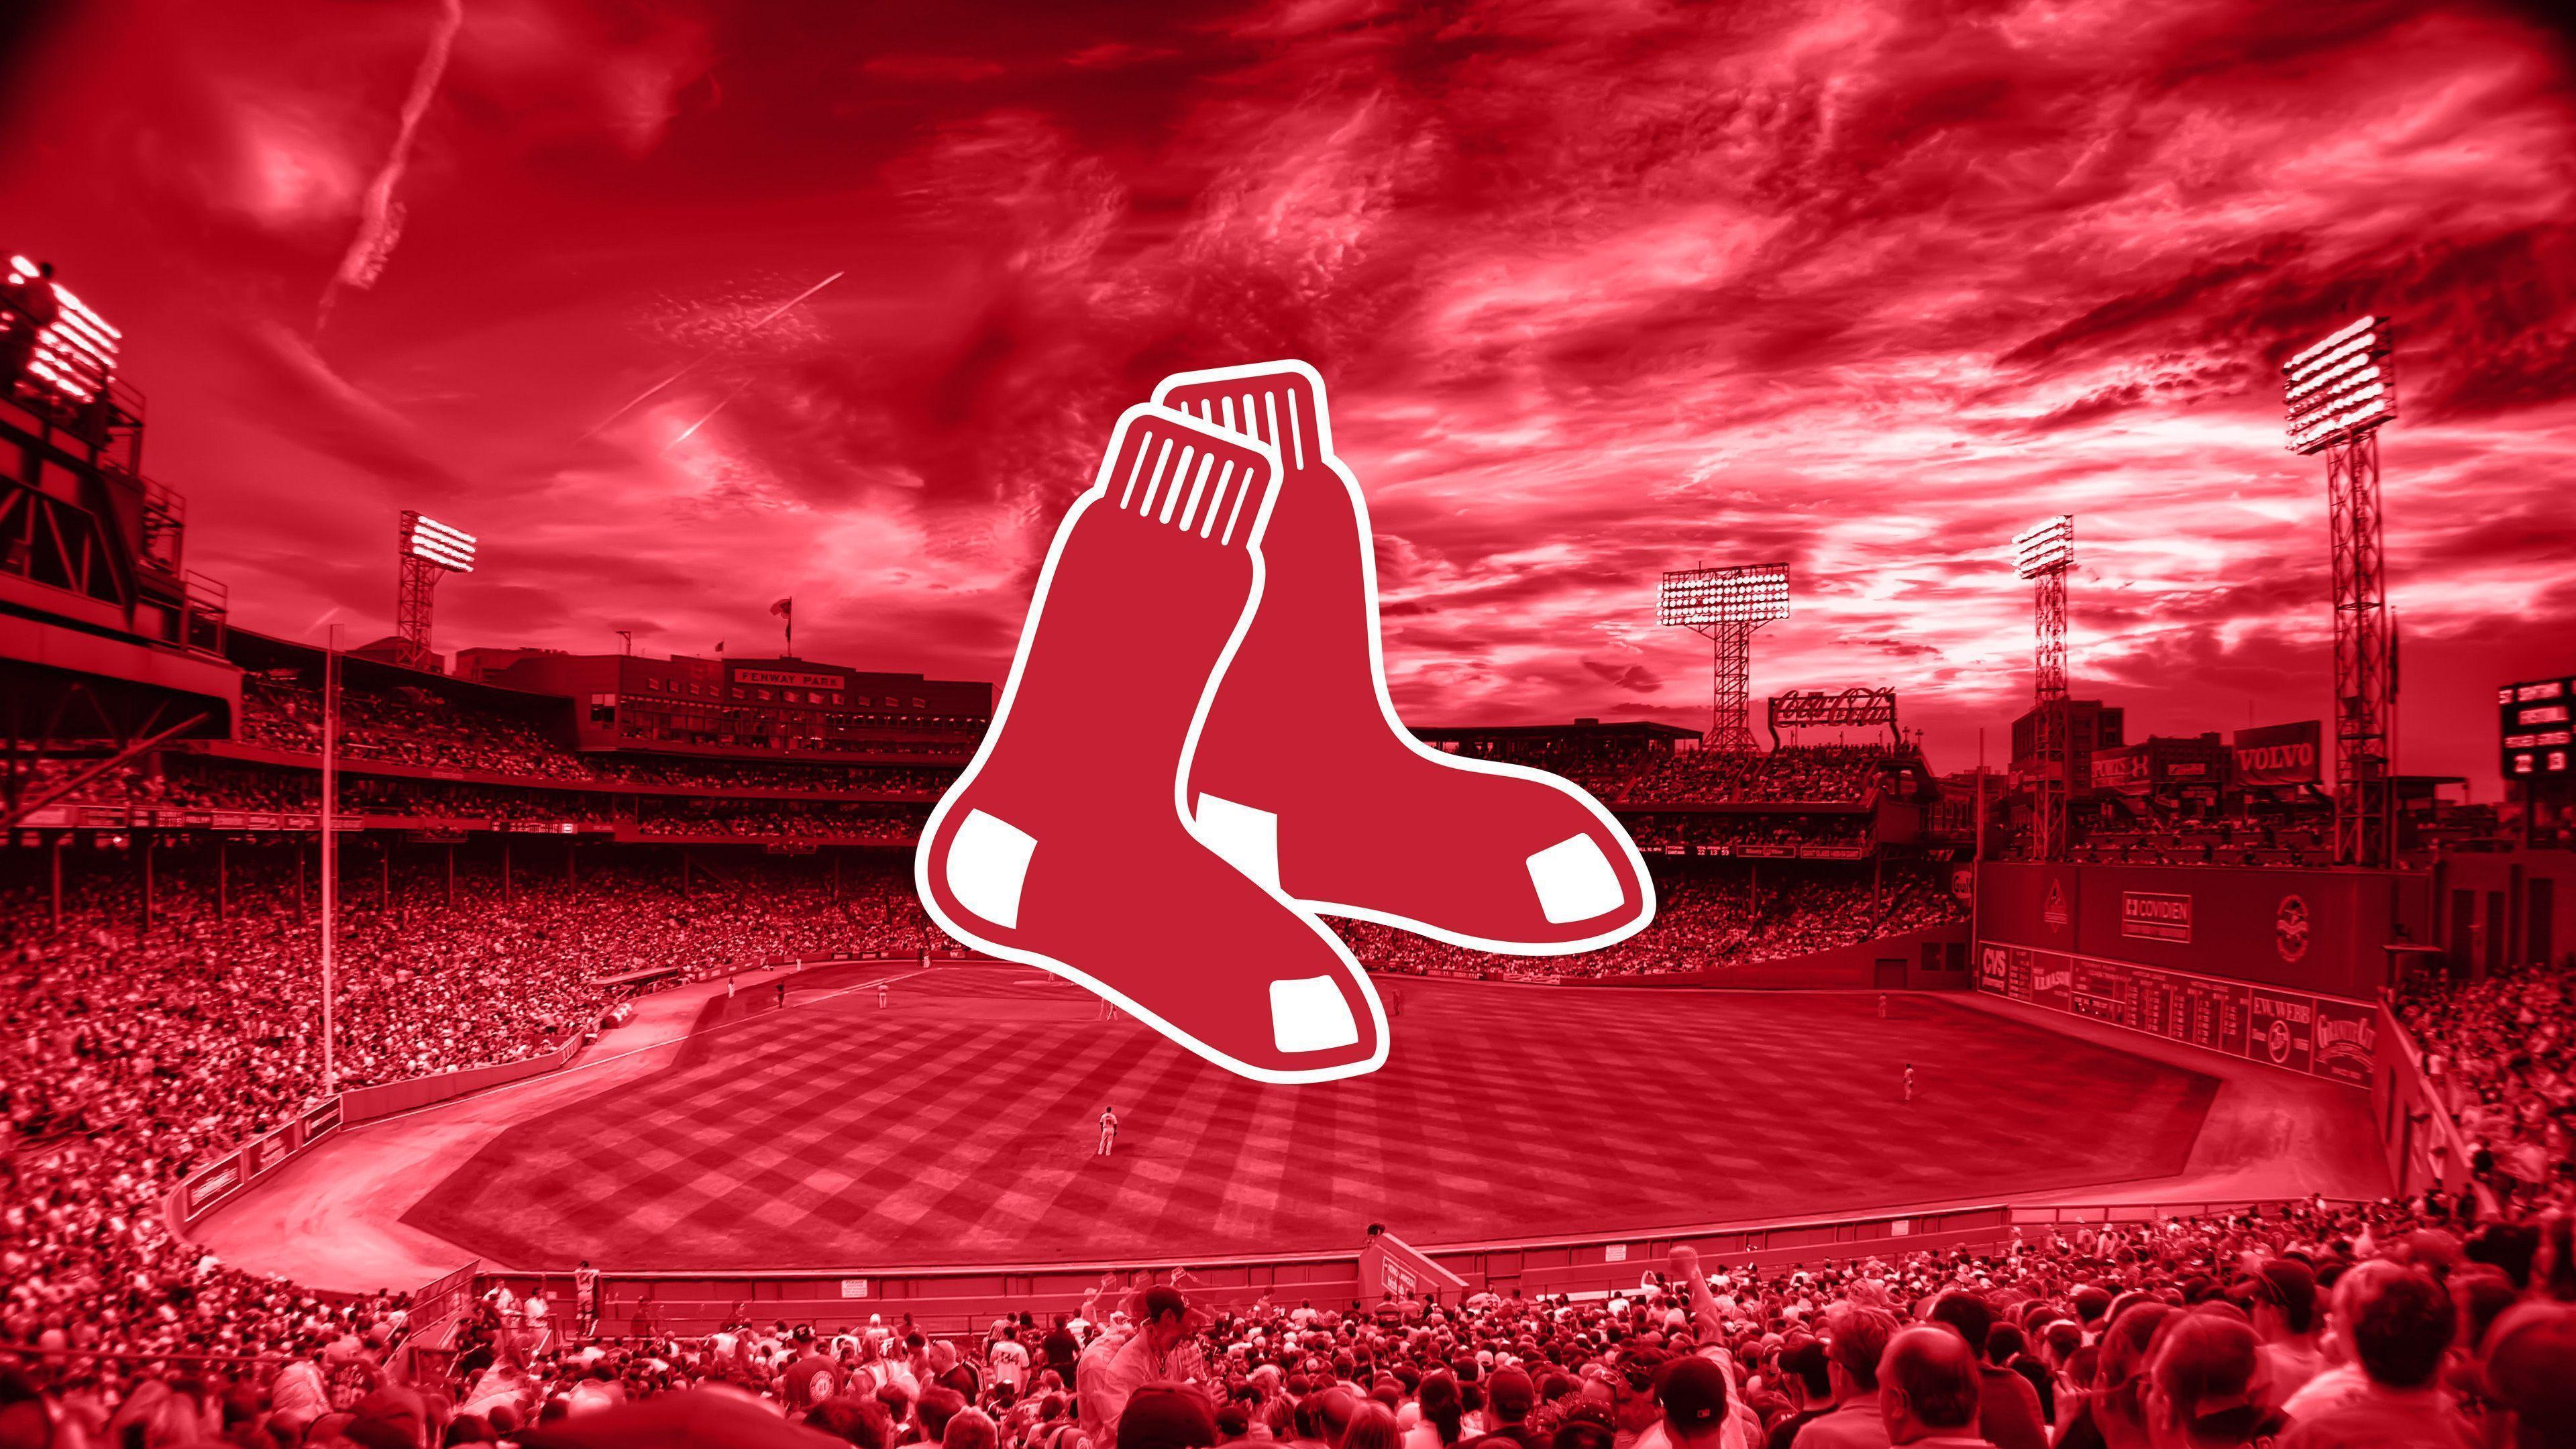 HD Boston Red Sox 4k Backgrounds for Gadgets